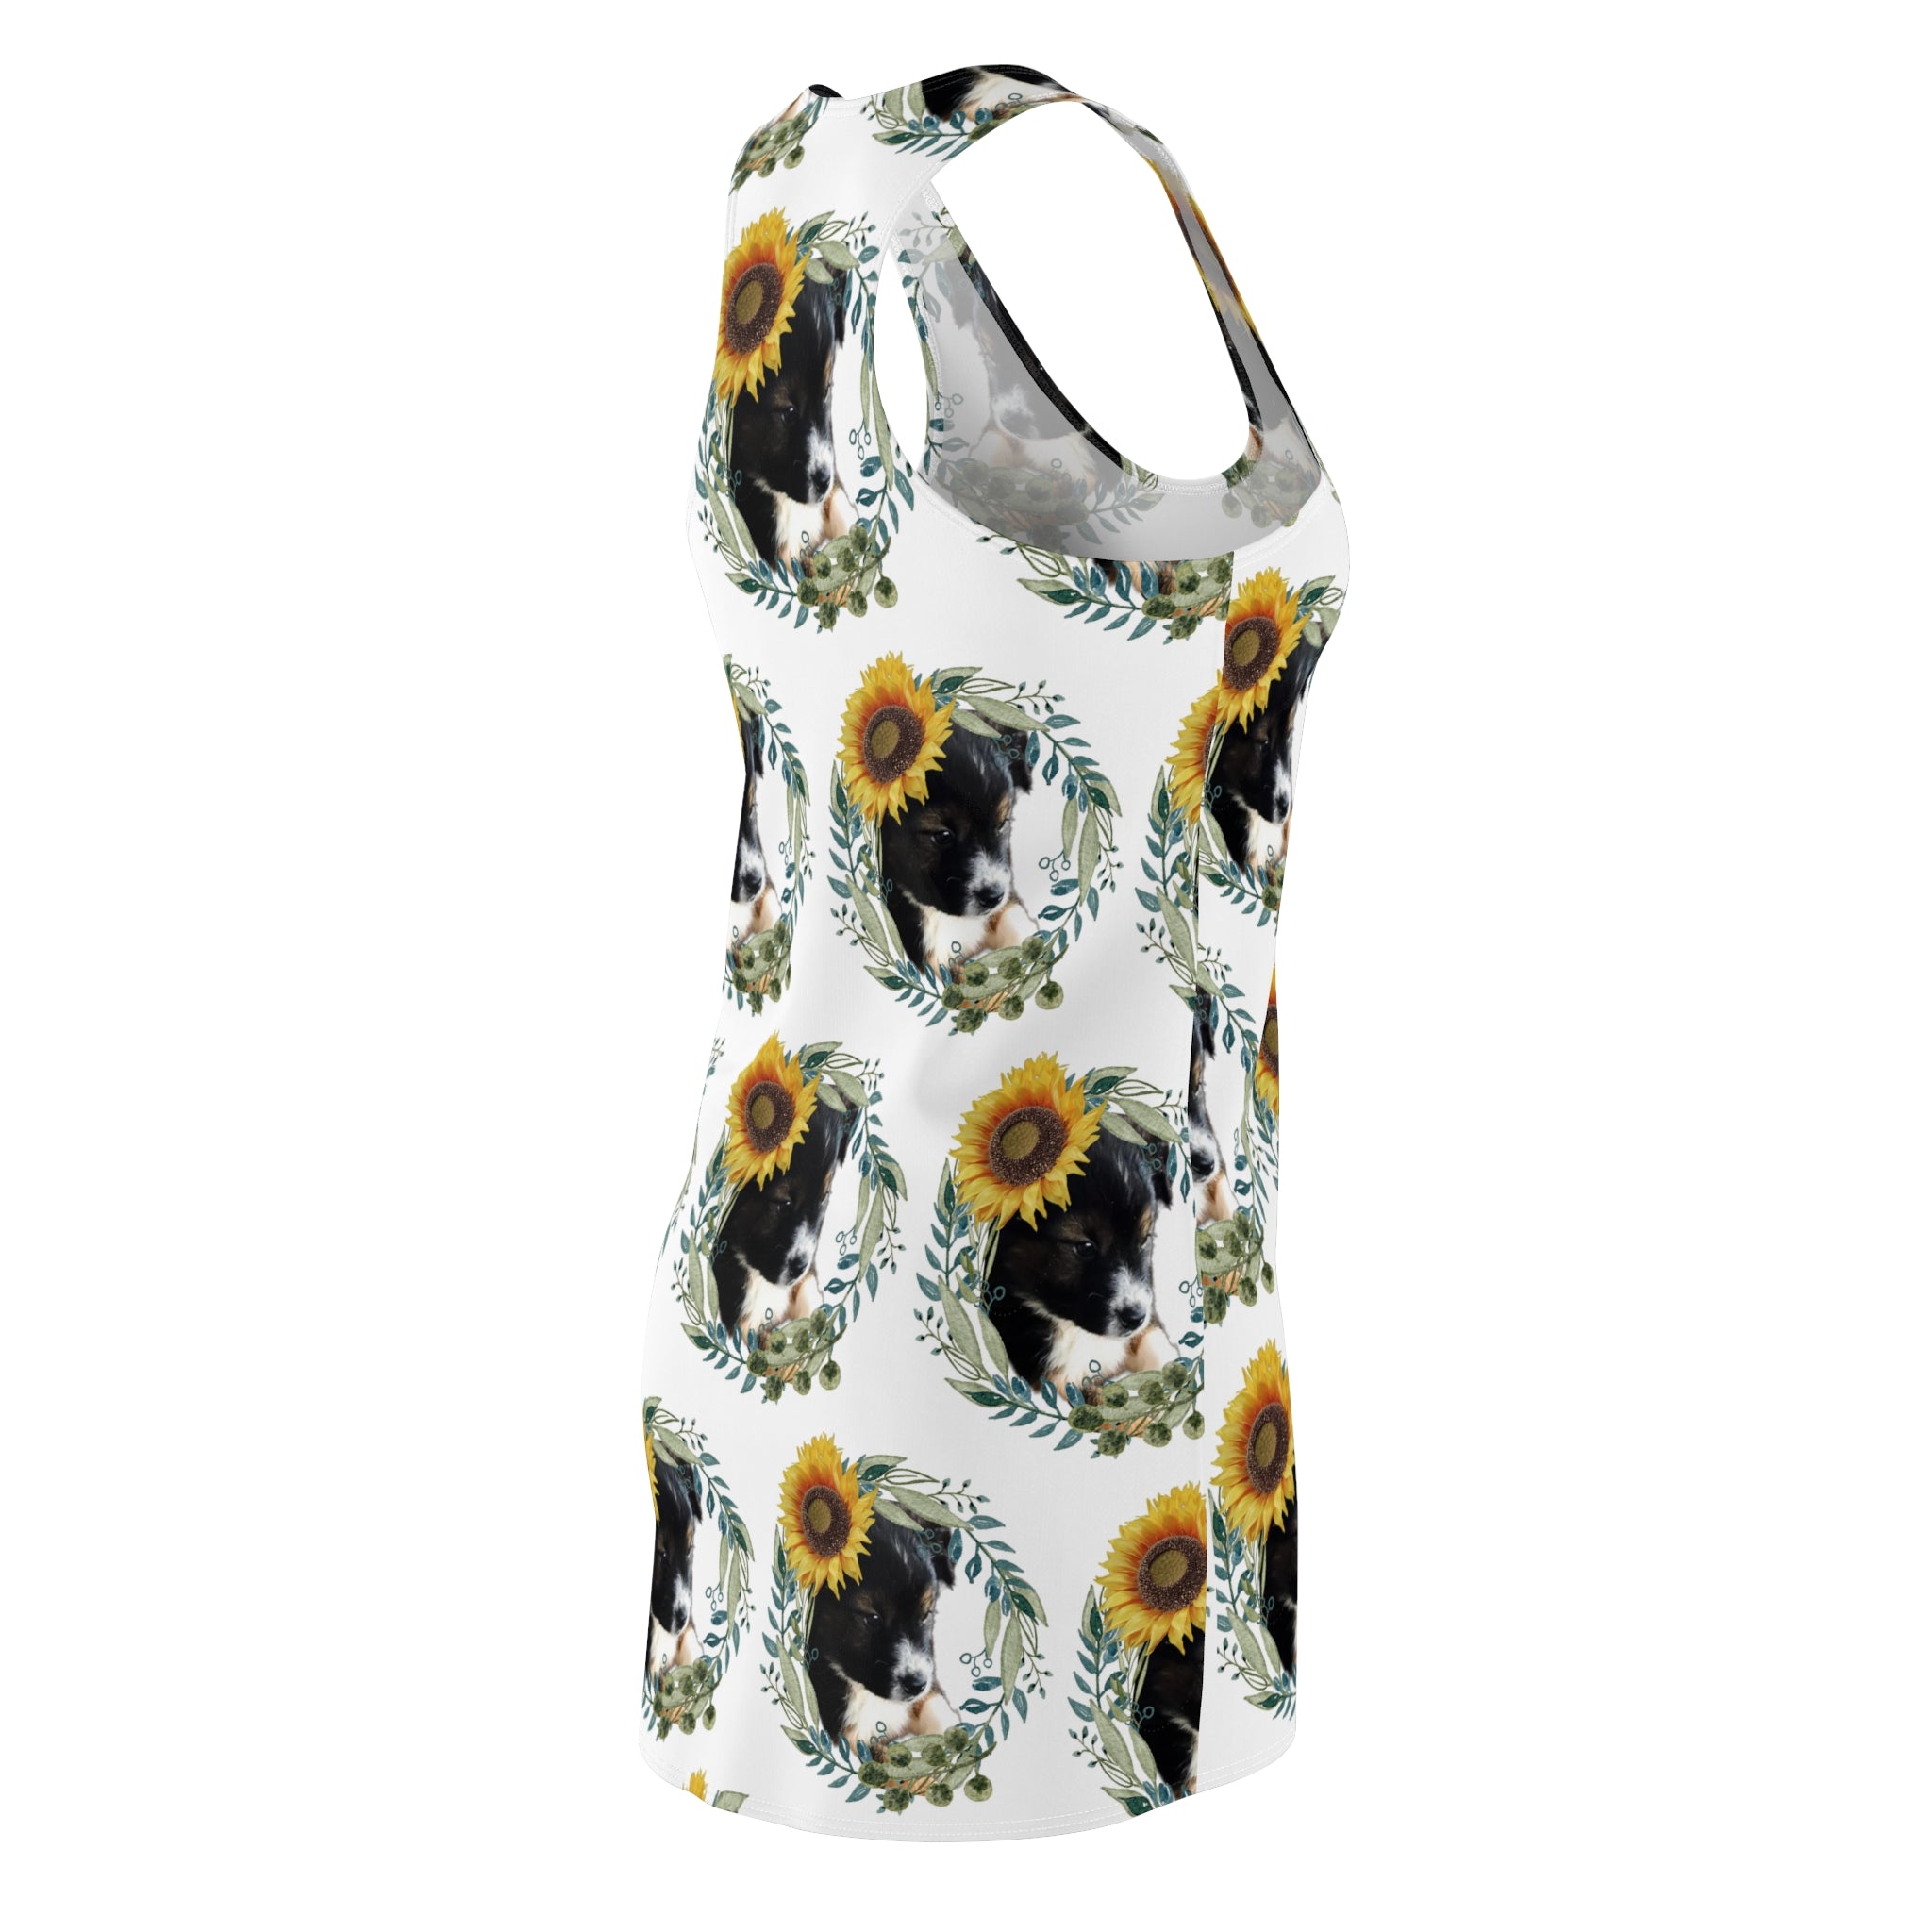 Cute Black Puppy with Sunflowers Printed Racerback Dress - Shell Design Boutique